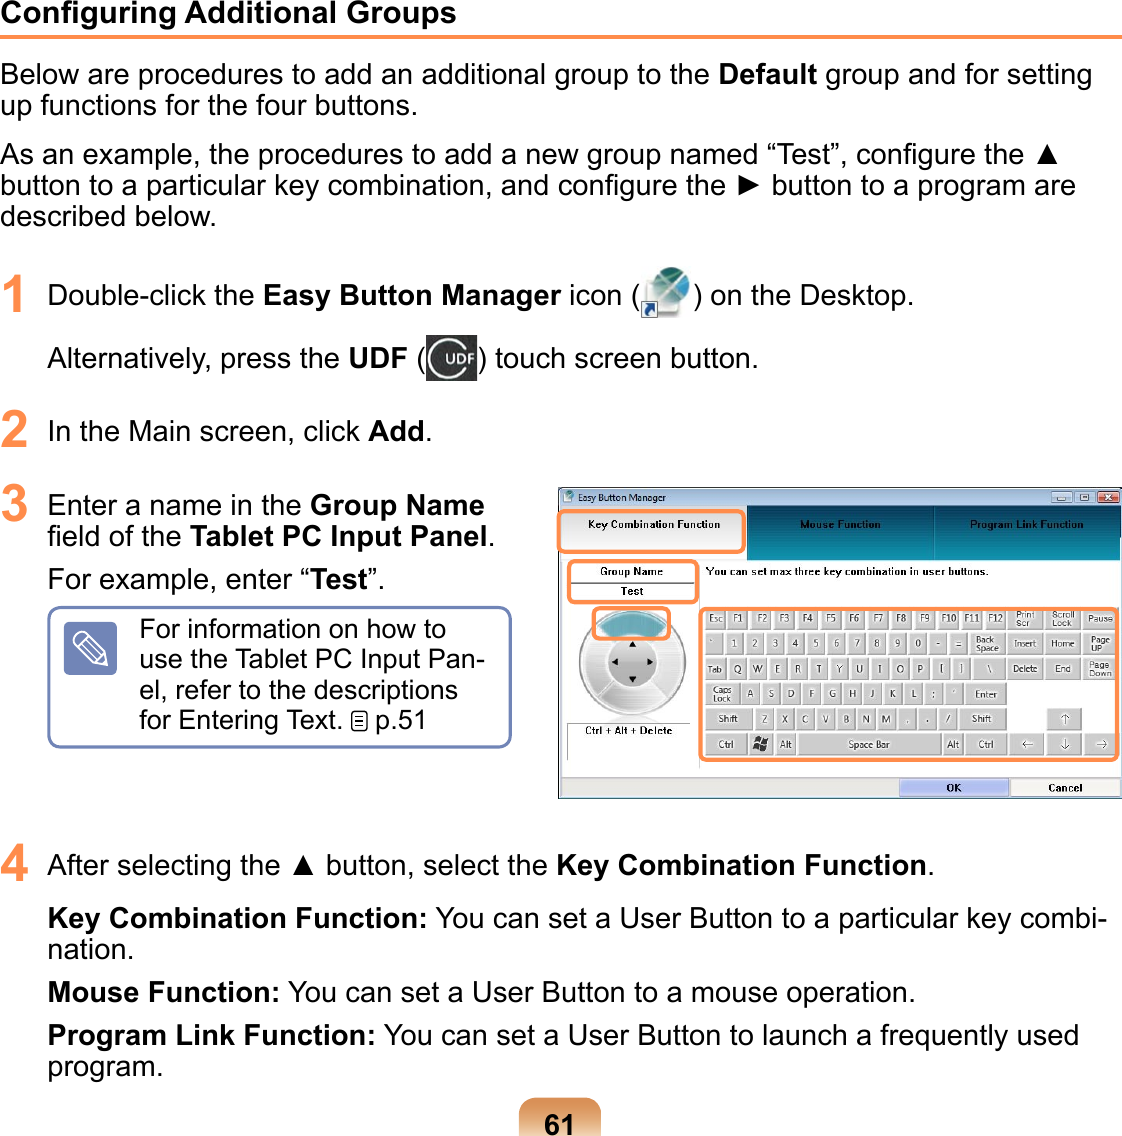 61Conﬁguring Additional GroupsBelow are procedures to add an additional group to the Default group and for setting up functions for the four buttons.As an example, the procedures to add a new group named “Test”, conﬁgure the ▲ button to a particular key combination, and conﬁgure the ► button to a program are described below.1  Double-click the Easy Button Manager icon ( ) on the Desktop.  Alternatively, press the UDF ( ) touch screen button.2  In the Main screen, click Add. 3  Enter a name in the Group Name ﬁeld of the Tablet PC Input Panel.For example, enter “Test”. For information on how to use the Tablet PC Input Pan-el, refer to the descriptions for Entering Text.   p.514  After selecting the ▲ button, select the Key Combination Function.Key Combination Function: You can set a User Button to a particular key combi-nation.Mouse Function: You can set a User Button to a mouse operation.Program Link Function: You can set a User Button to launch a frequently used program.